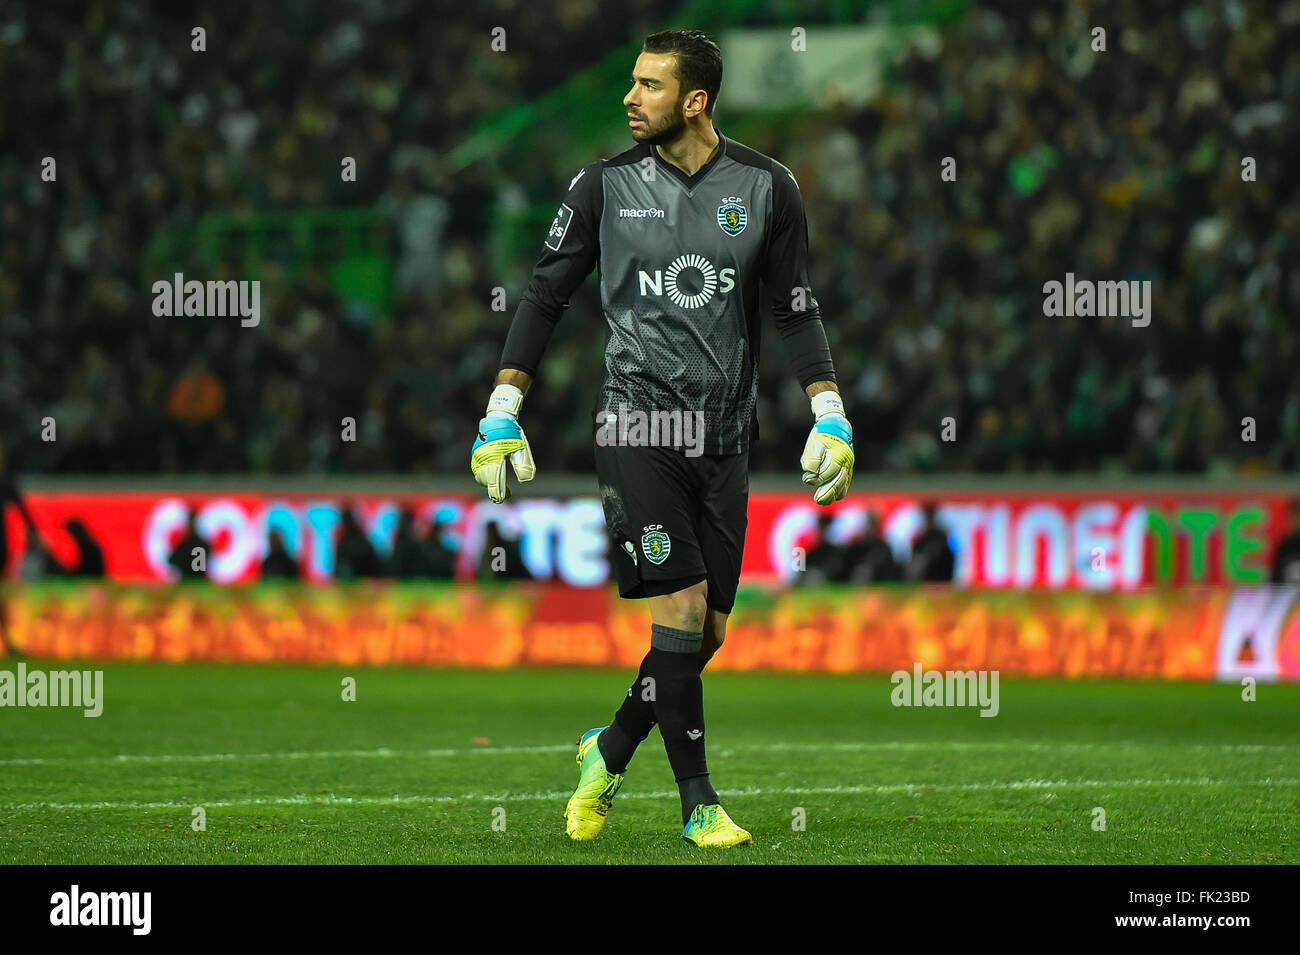 Lisbon, Portugal. 5th March, 2016.  SPORTING-BENFICA - Rui Patricio, Sporting goalkepper, in action during Portuguese League football match between Sporting and Benfica held in Estádio Alvalade XXI, in Lisbon,  Portugal. Photo: Bruno de Carvalho/Alamy Live News Stock Photo